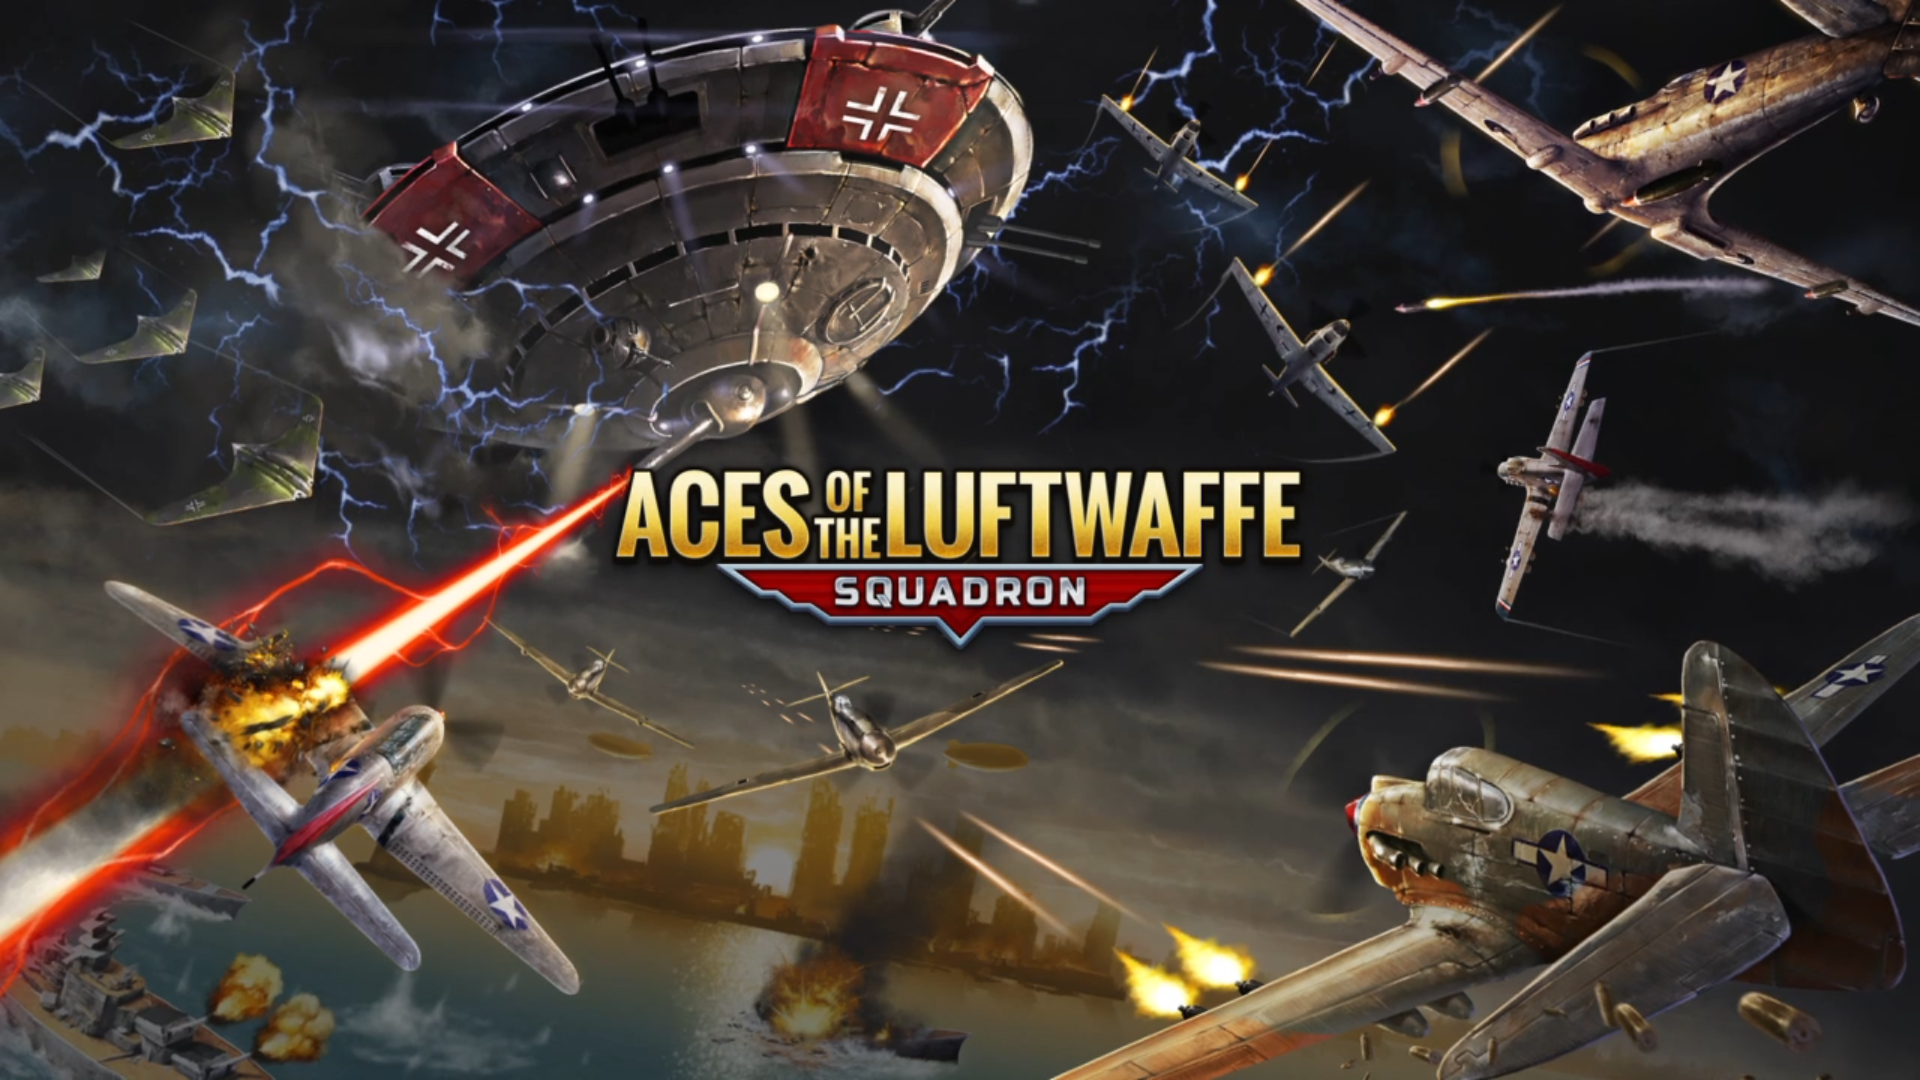 Aces of the Luftwaffe Squadron-title